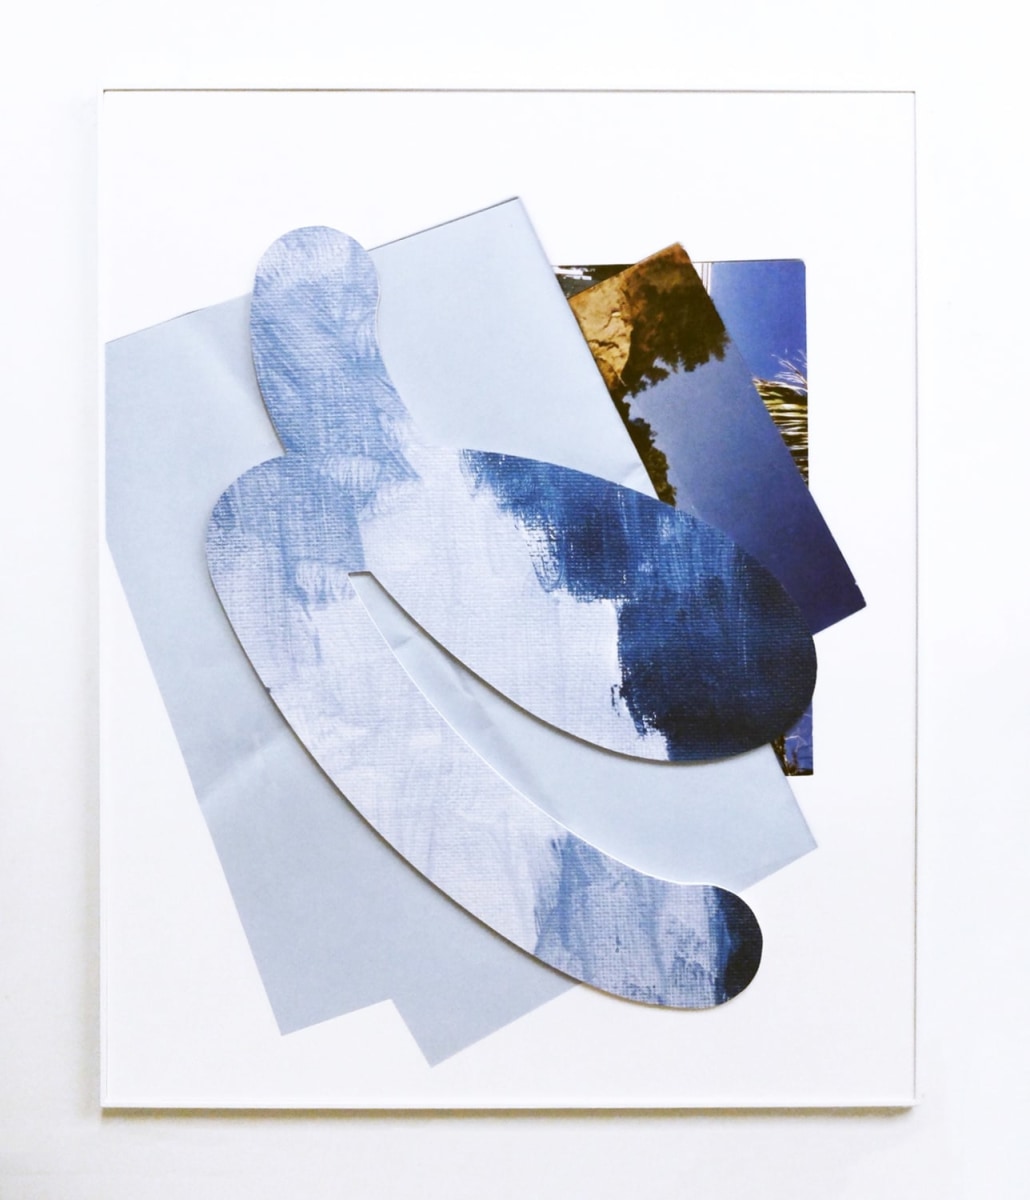 Kate Bonner Side to side and it will move, 2016  Digital prints on MDF  60 x 48 x 3 in.